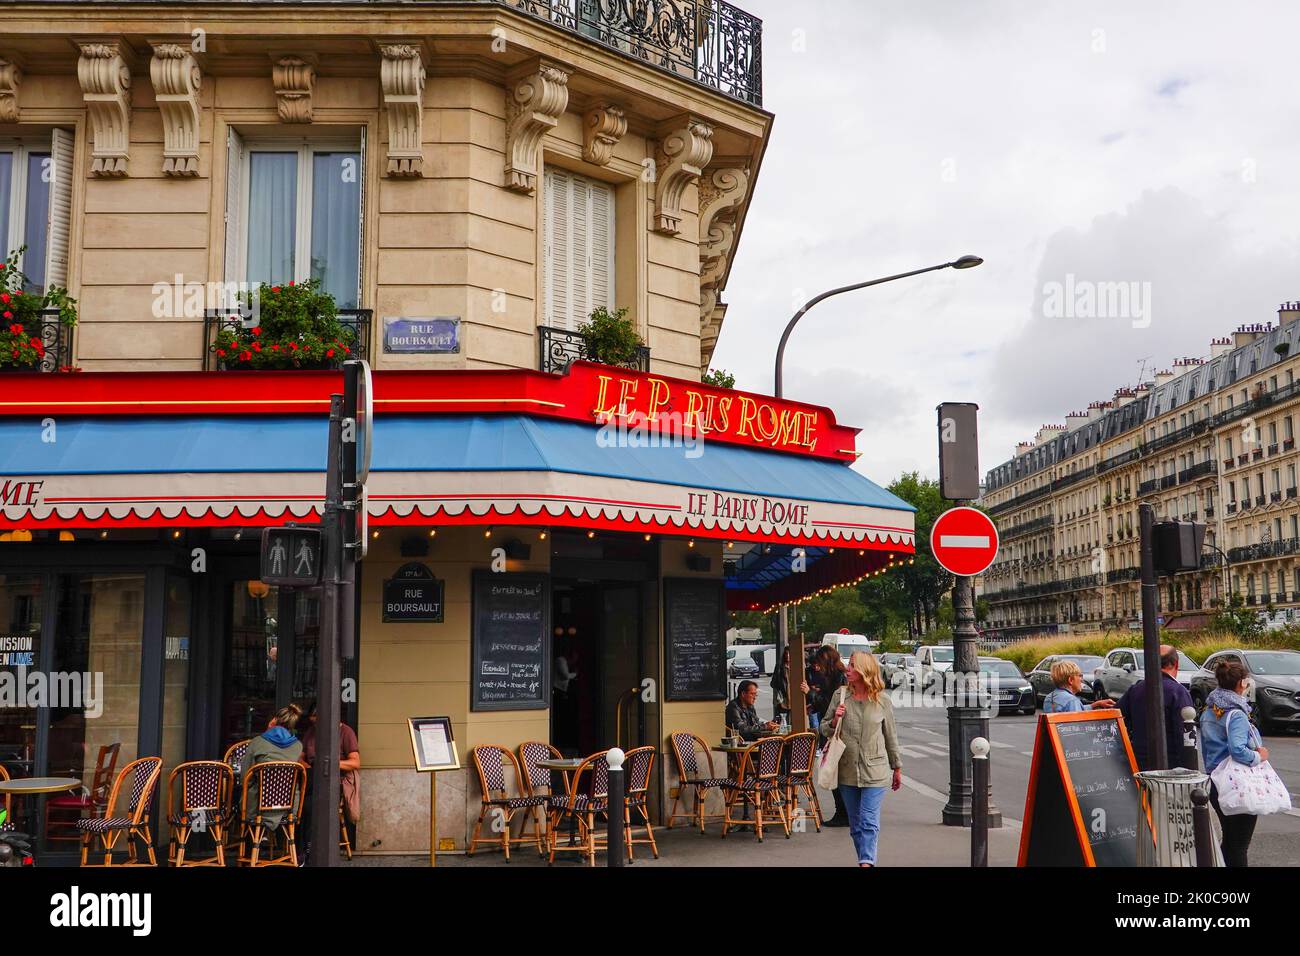 Cafe chairs outside Brasserie Le Paris Rome, restaurant in the Batignolles area of the 17th Arrondissement, at Rome stop, Metro Line 2, Paris, France. Stock Photo